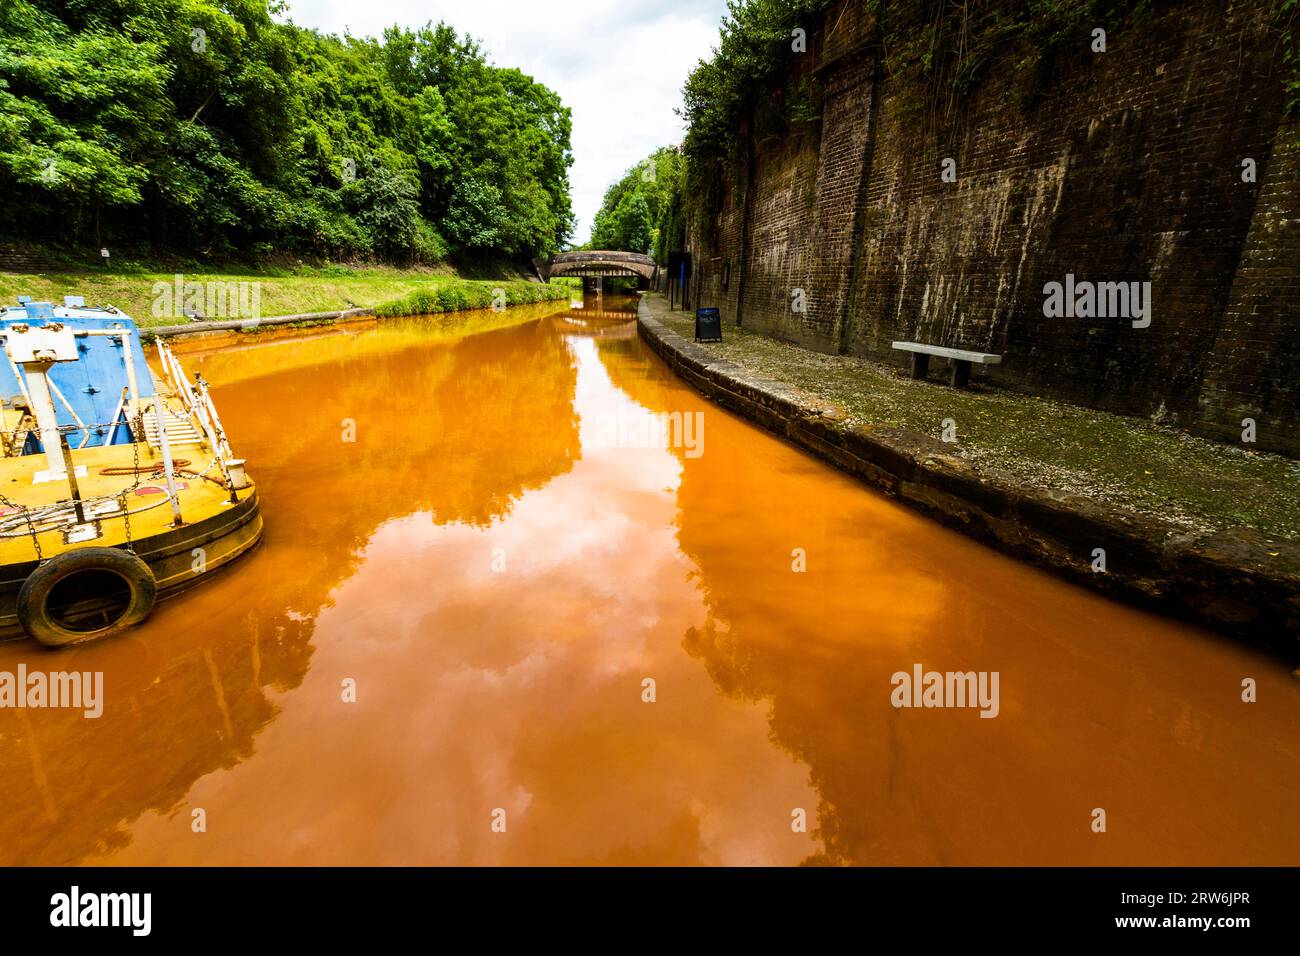 The Trent and Mersey Canal, Kidsgrove, Newcastle-under-Lyme. The water is orange because if clay deposited in the Harecastle Tunnel, landscape, wide a Stock Photo